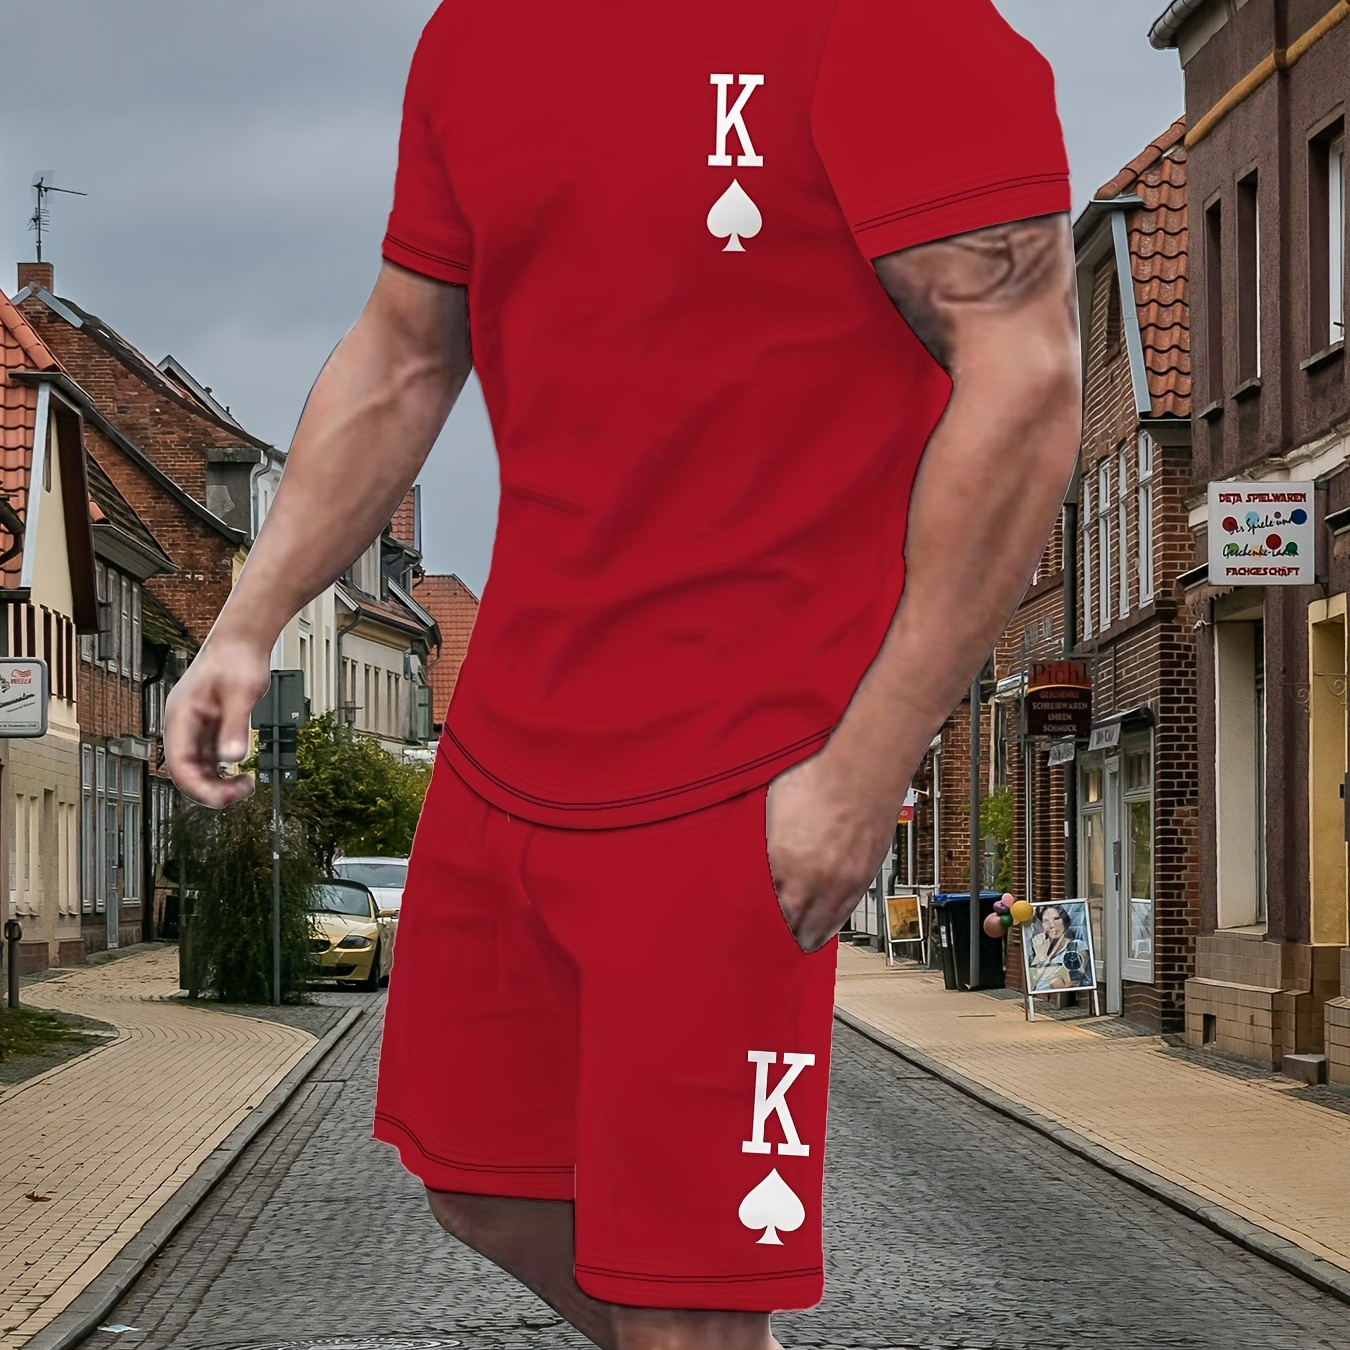 

Men's Outfit, K Graphic Print Casual Crew Neck Short Sleeve T-shirt & Shorts 2-piece Set For Summer Outdoor Activities